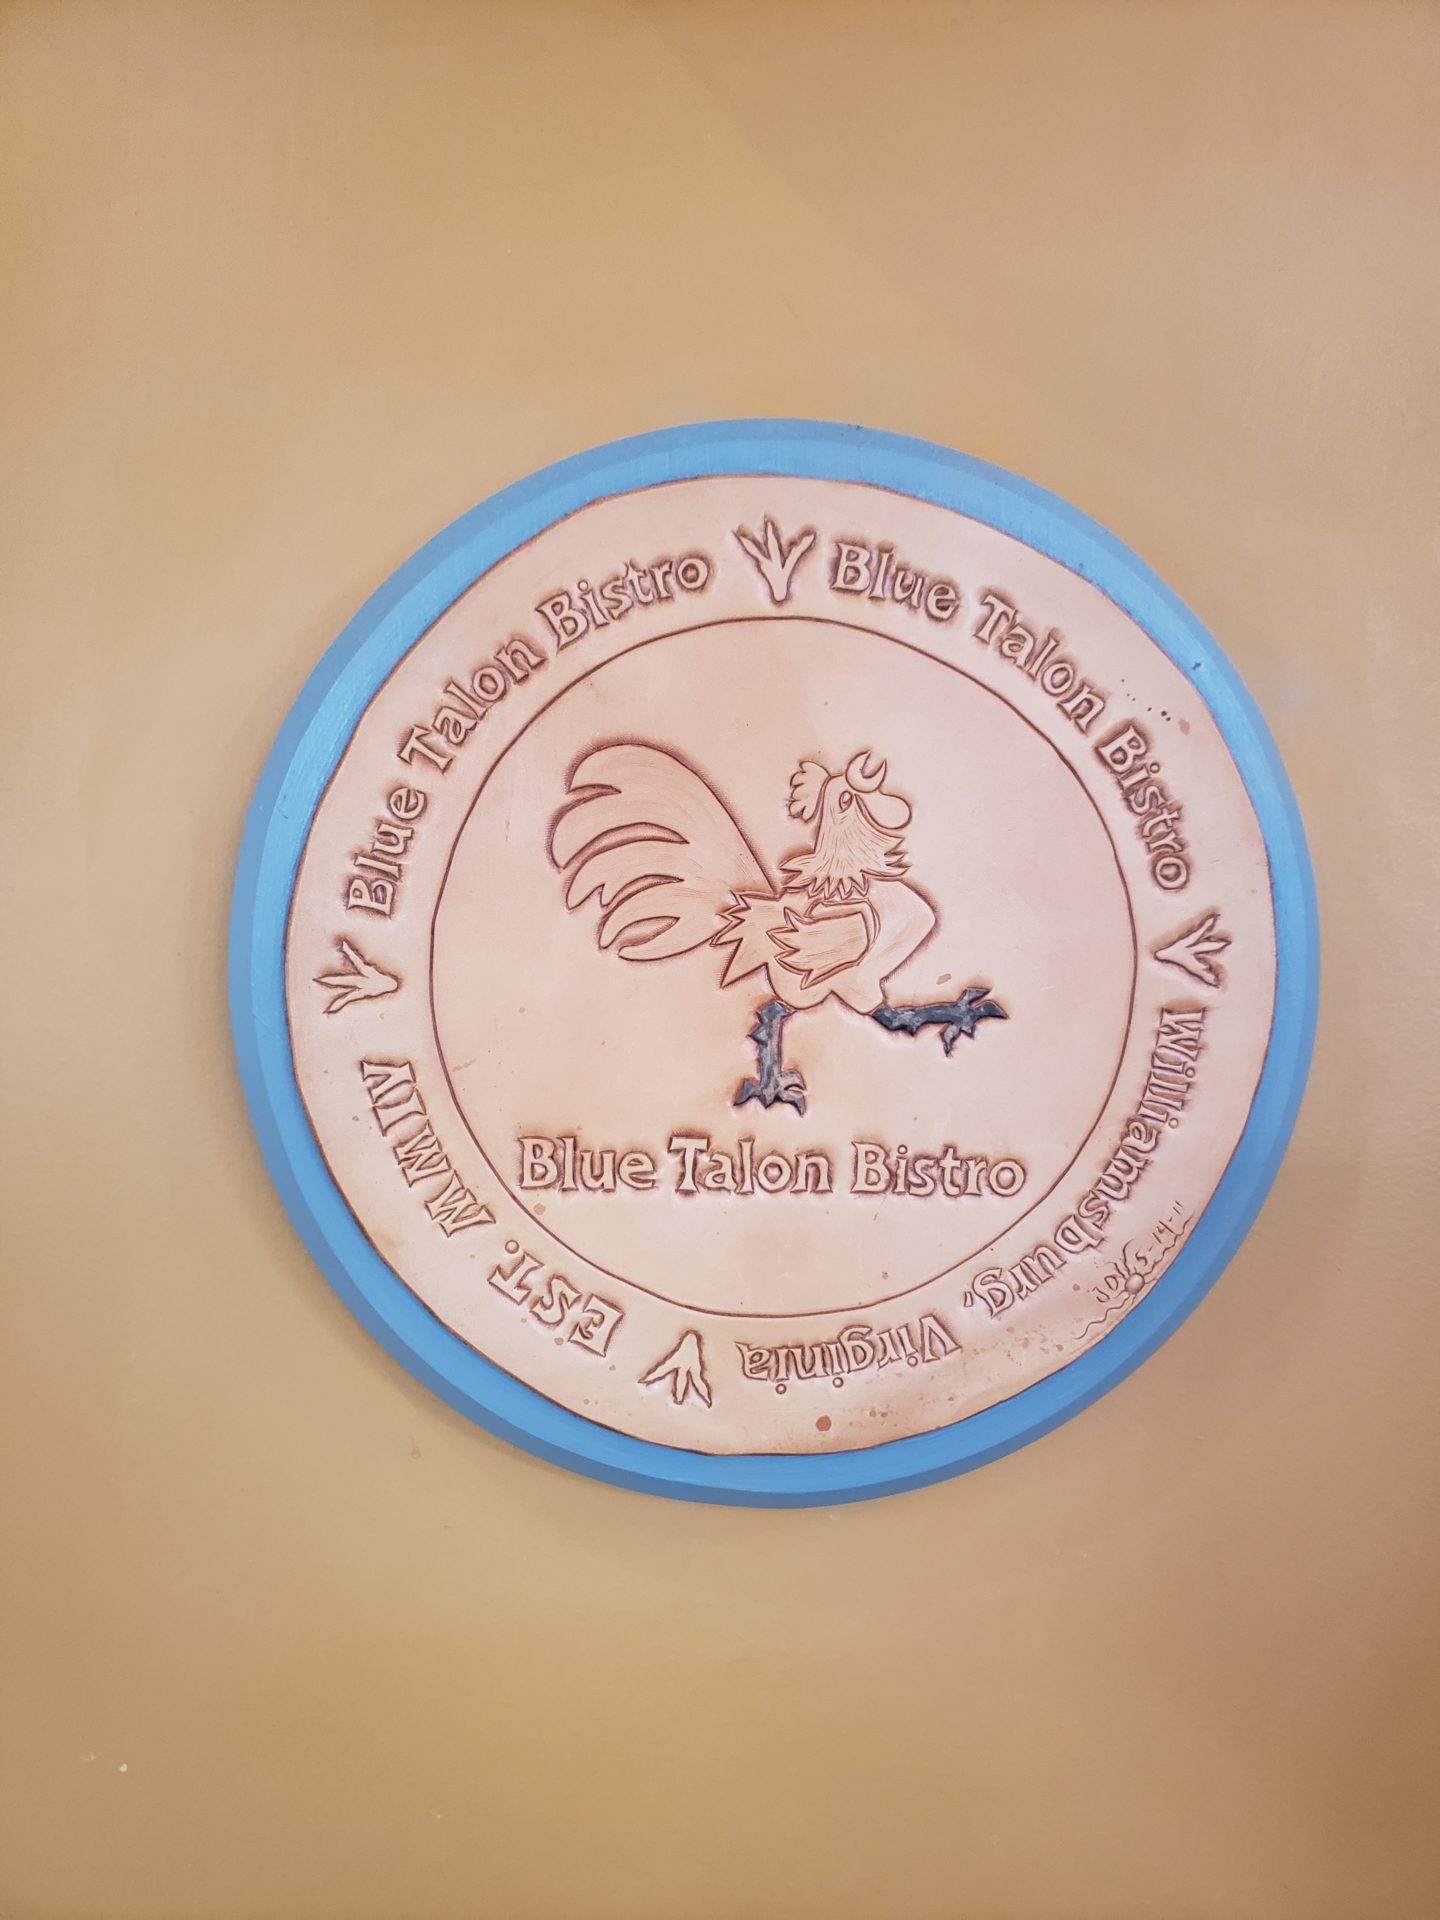 a circular sign with a rooster on it